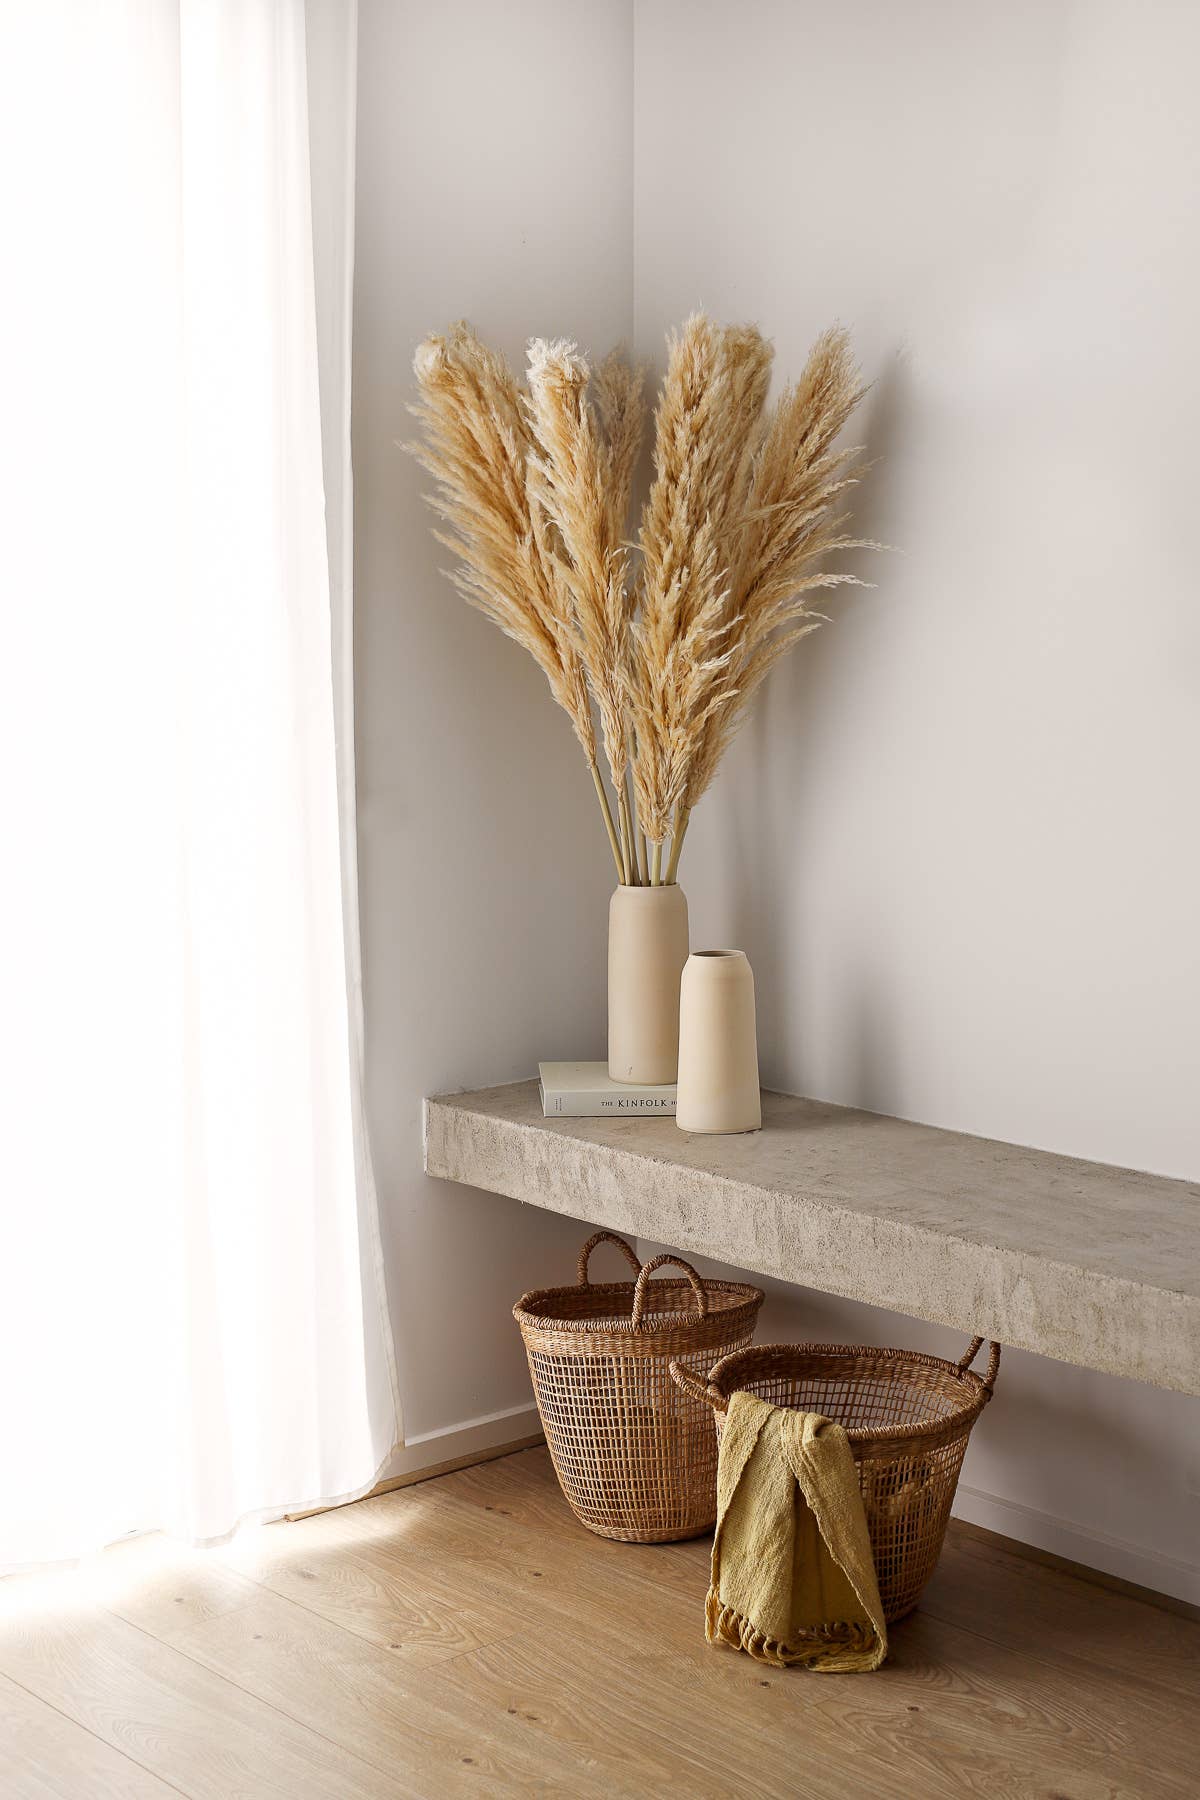 For Love of Pampas | Pampas Grass